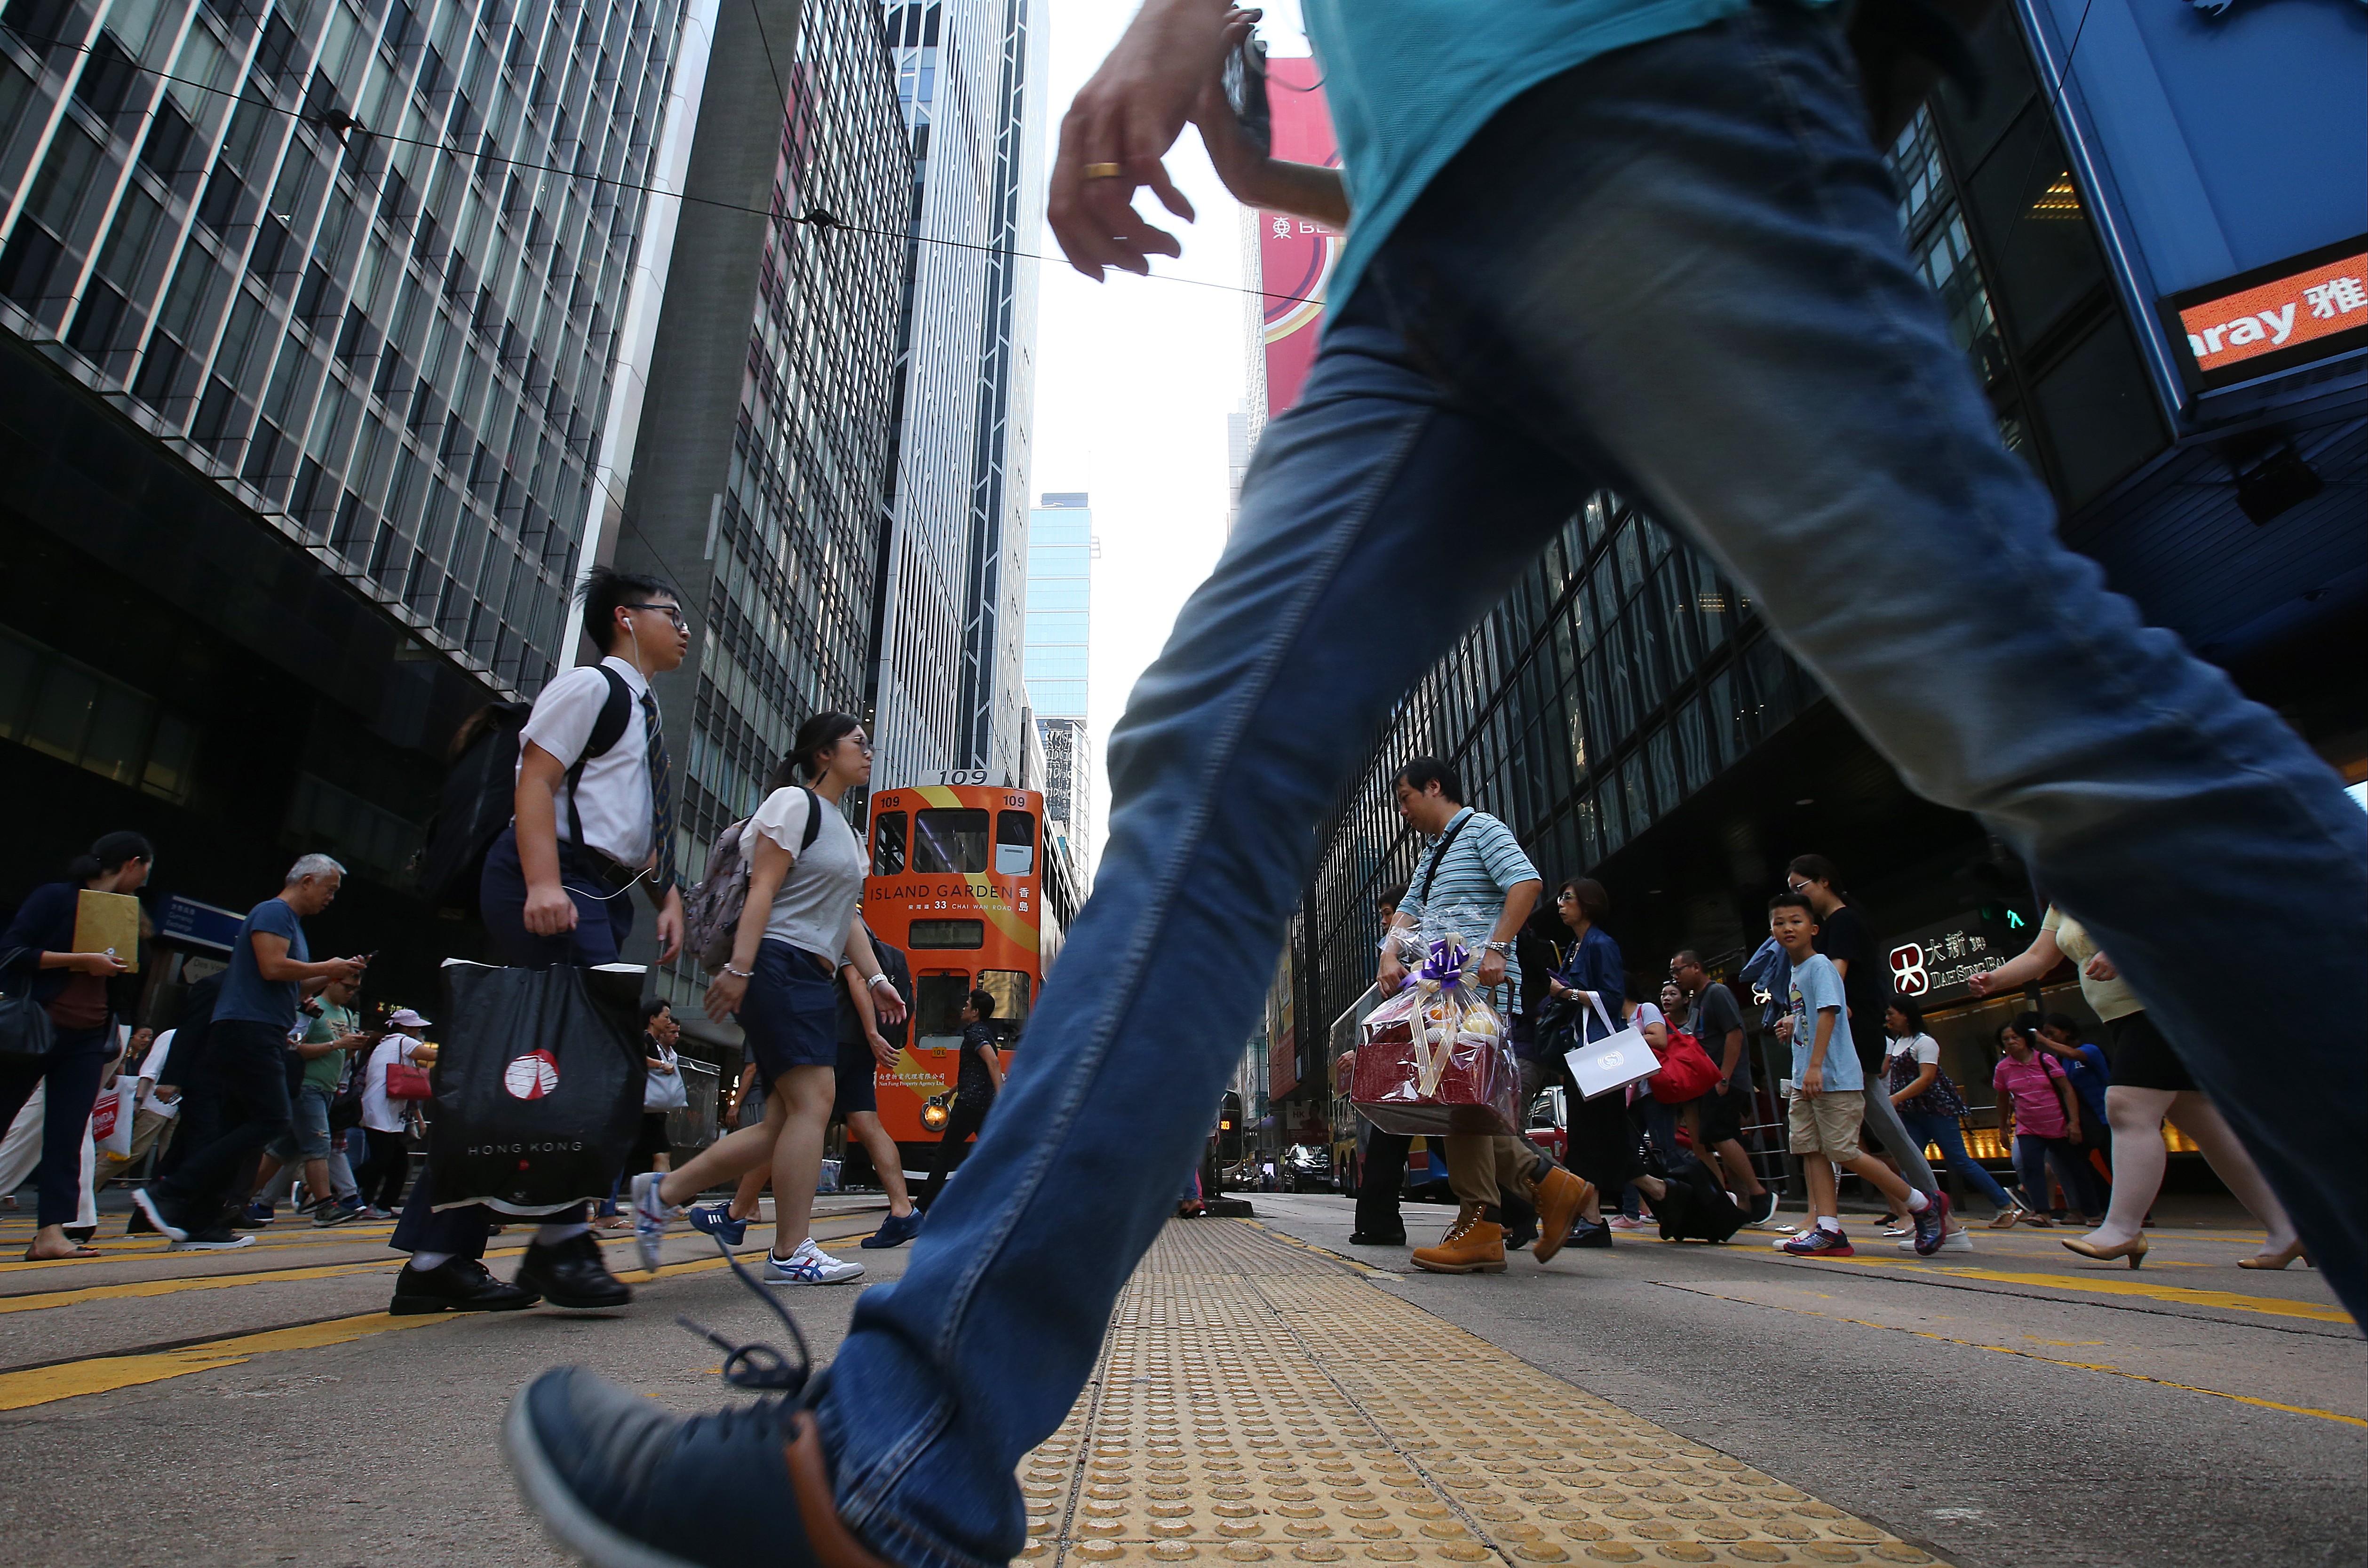 A pedestrian crosses the street in Central, one of the districts targeted for walkability trials. Photo: K. Y. Cheng